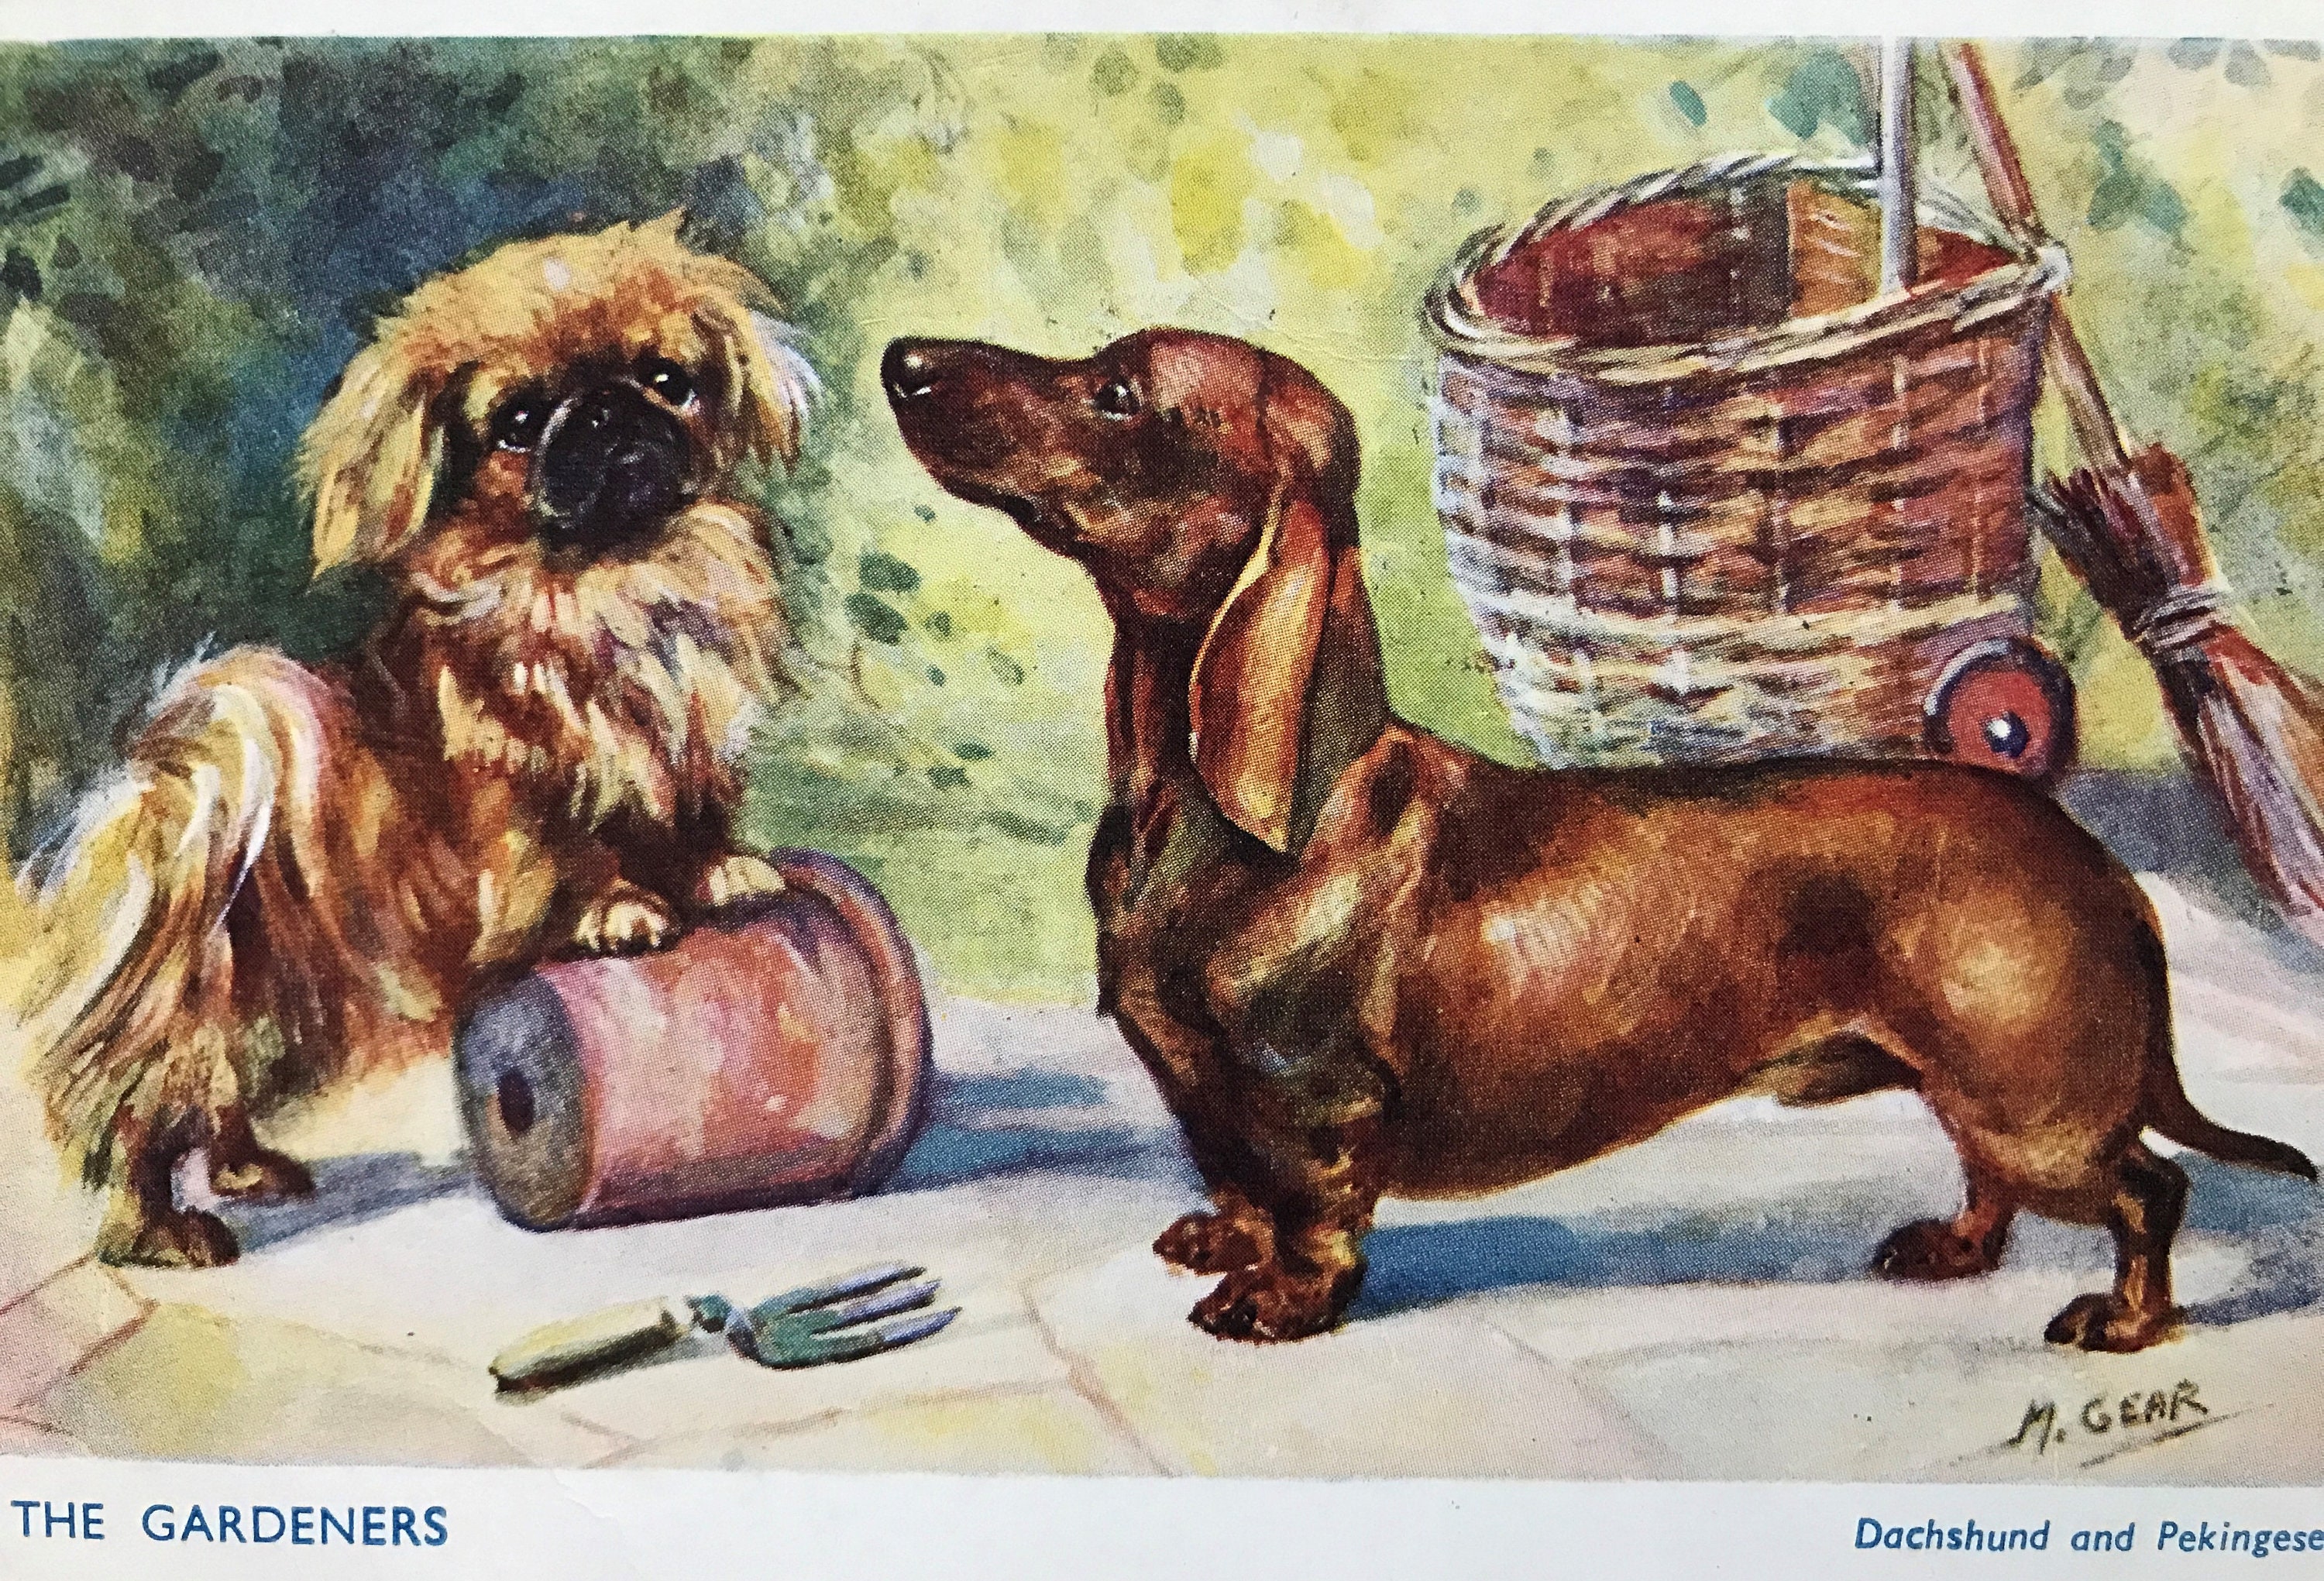 MABEL GEAR Pekingese Dachshund dog Vintage Salmon series post card mounted picture gift The Gardeners No.5080 Christmas Birthday